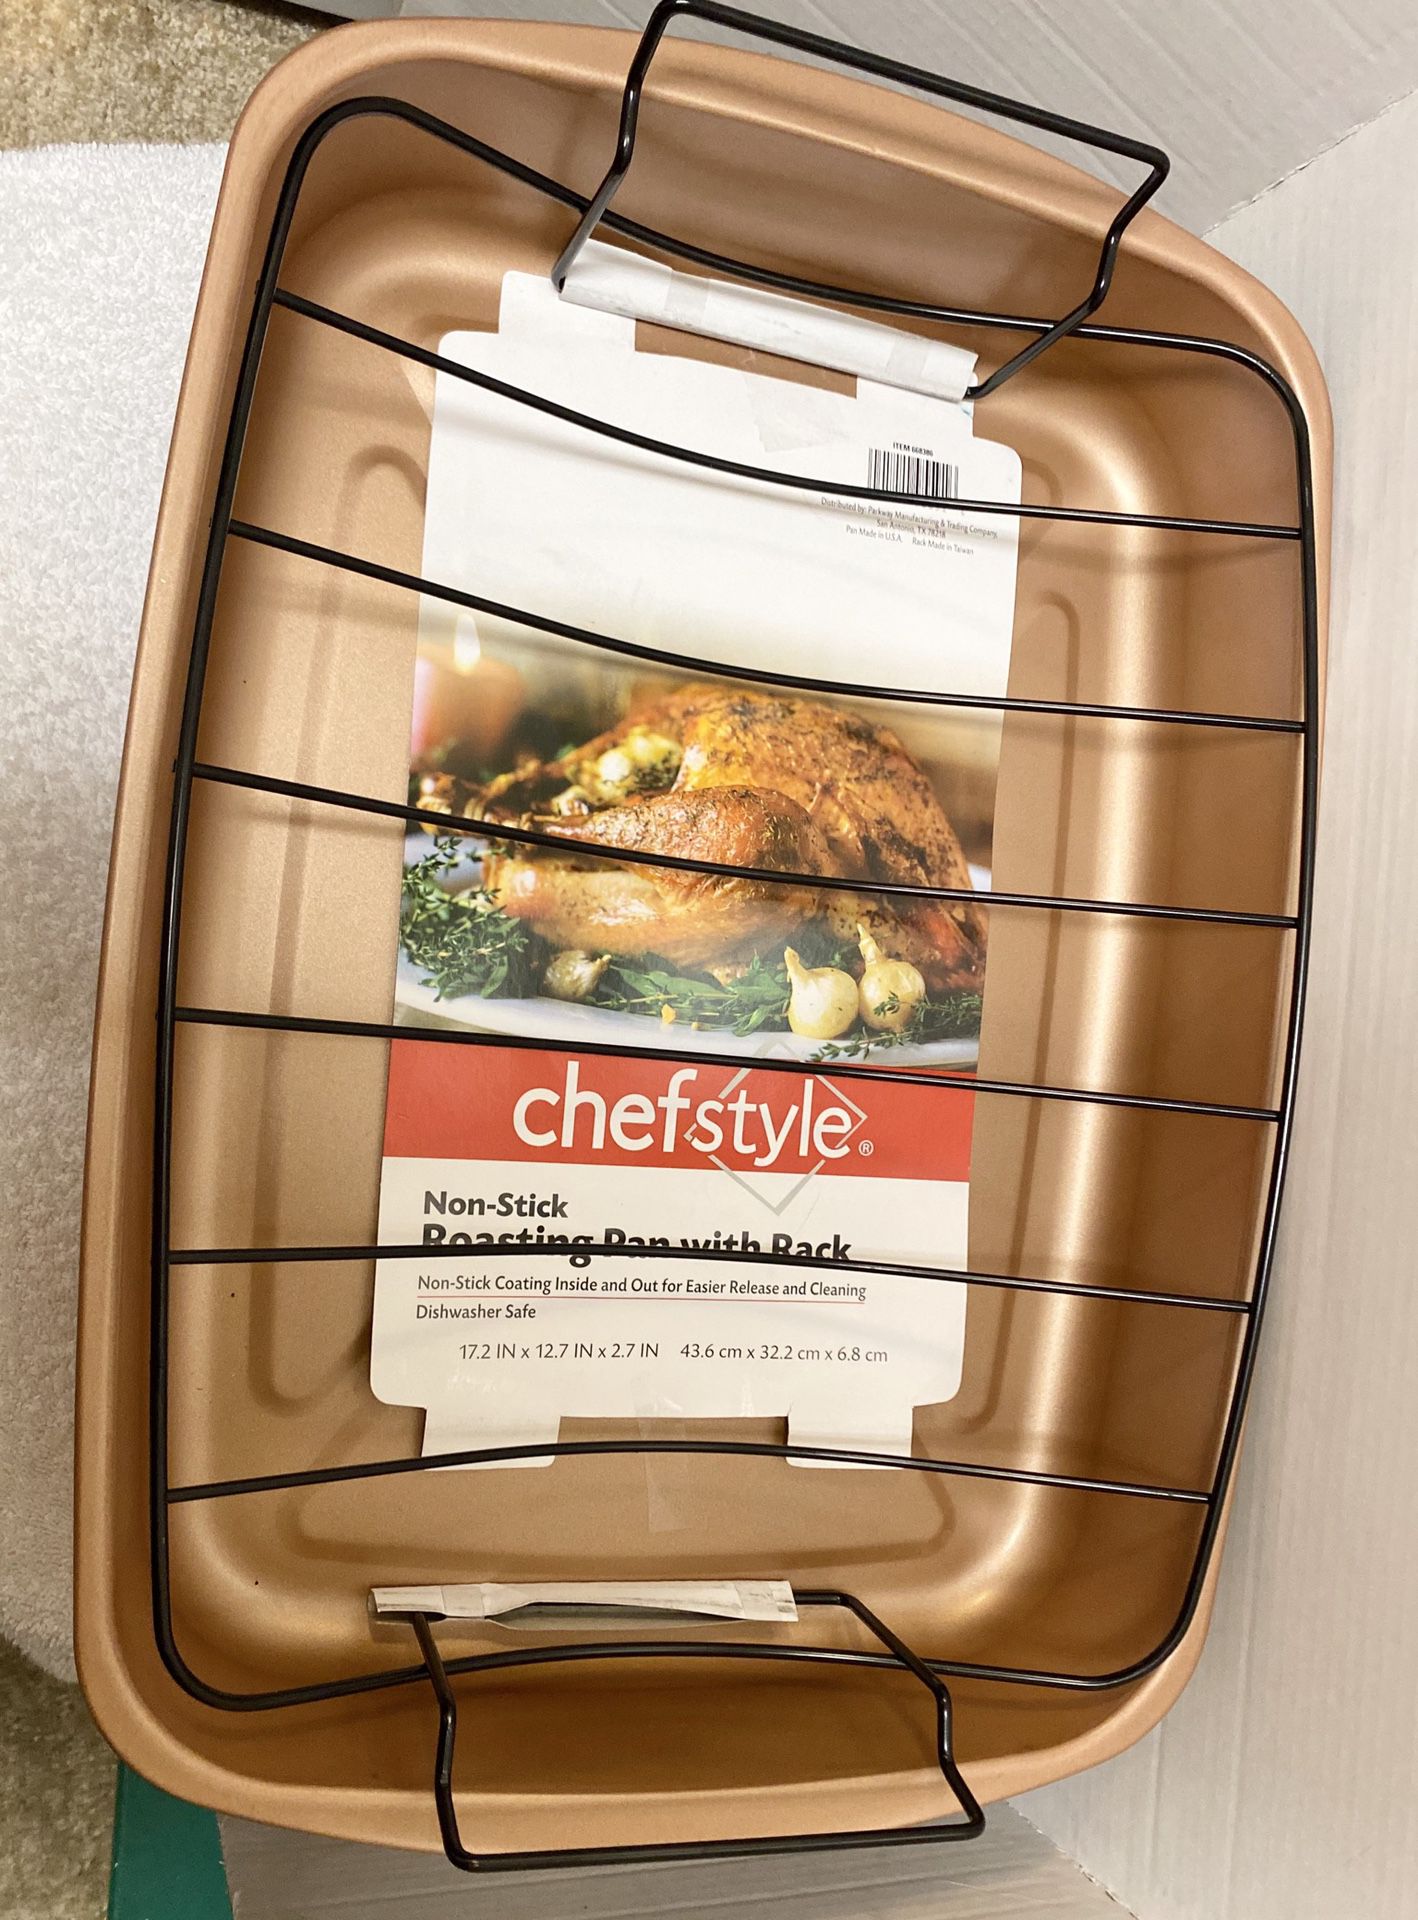 Copper Chef style Non-stick Roasting Pan with Rack